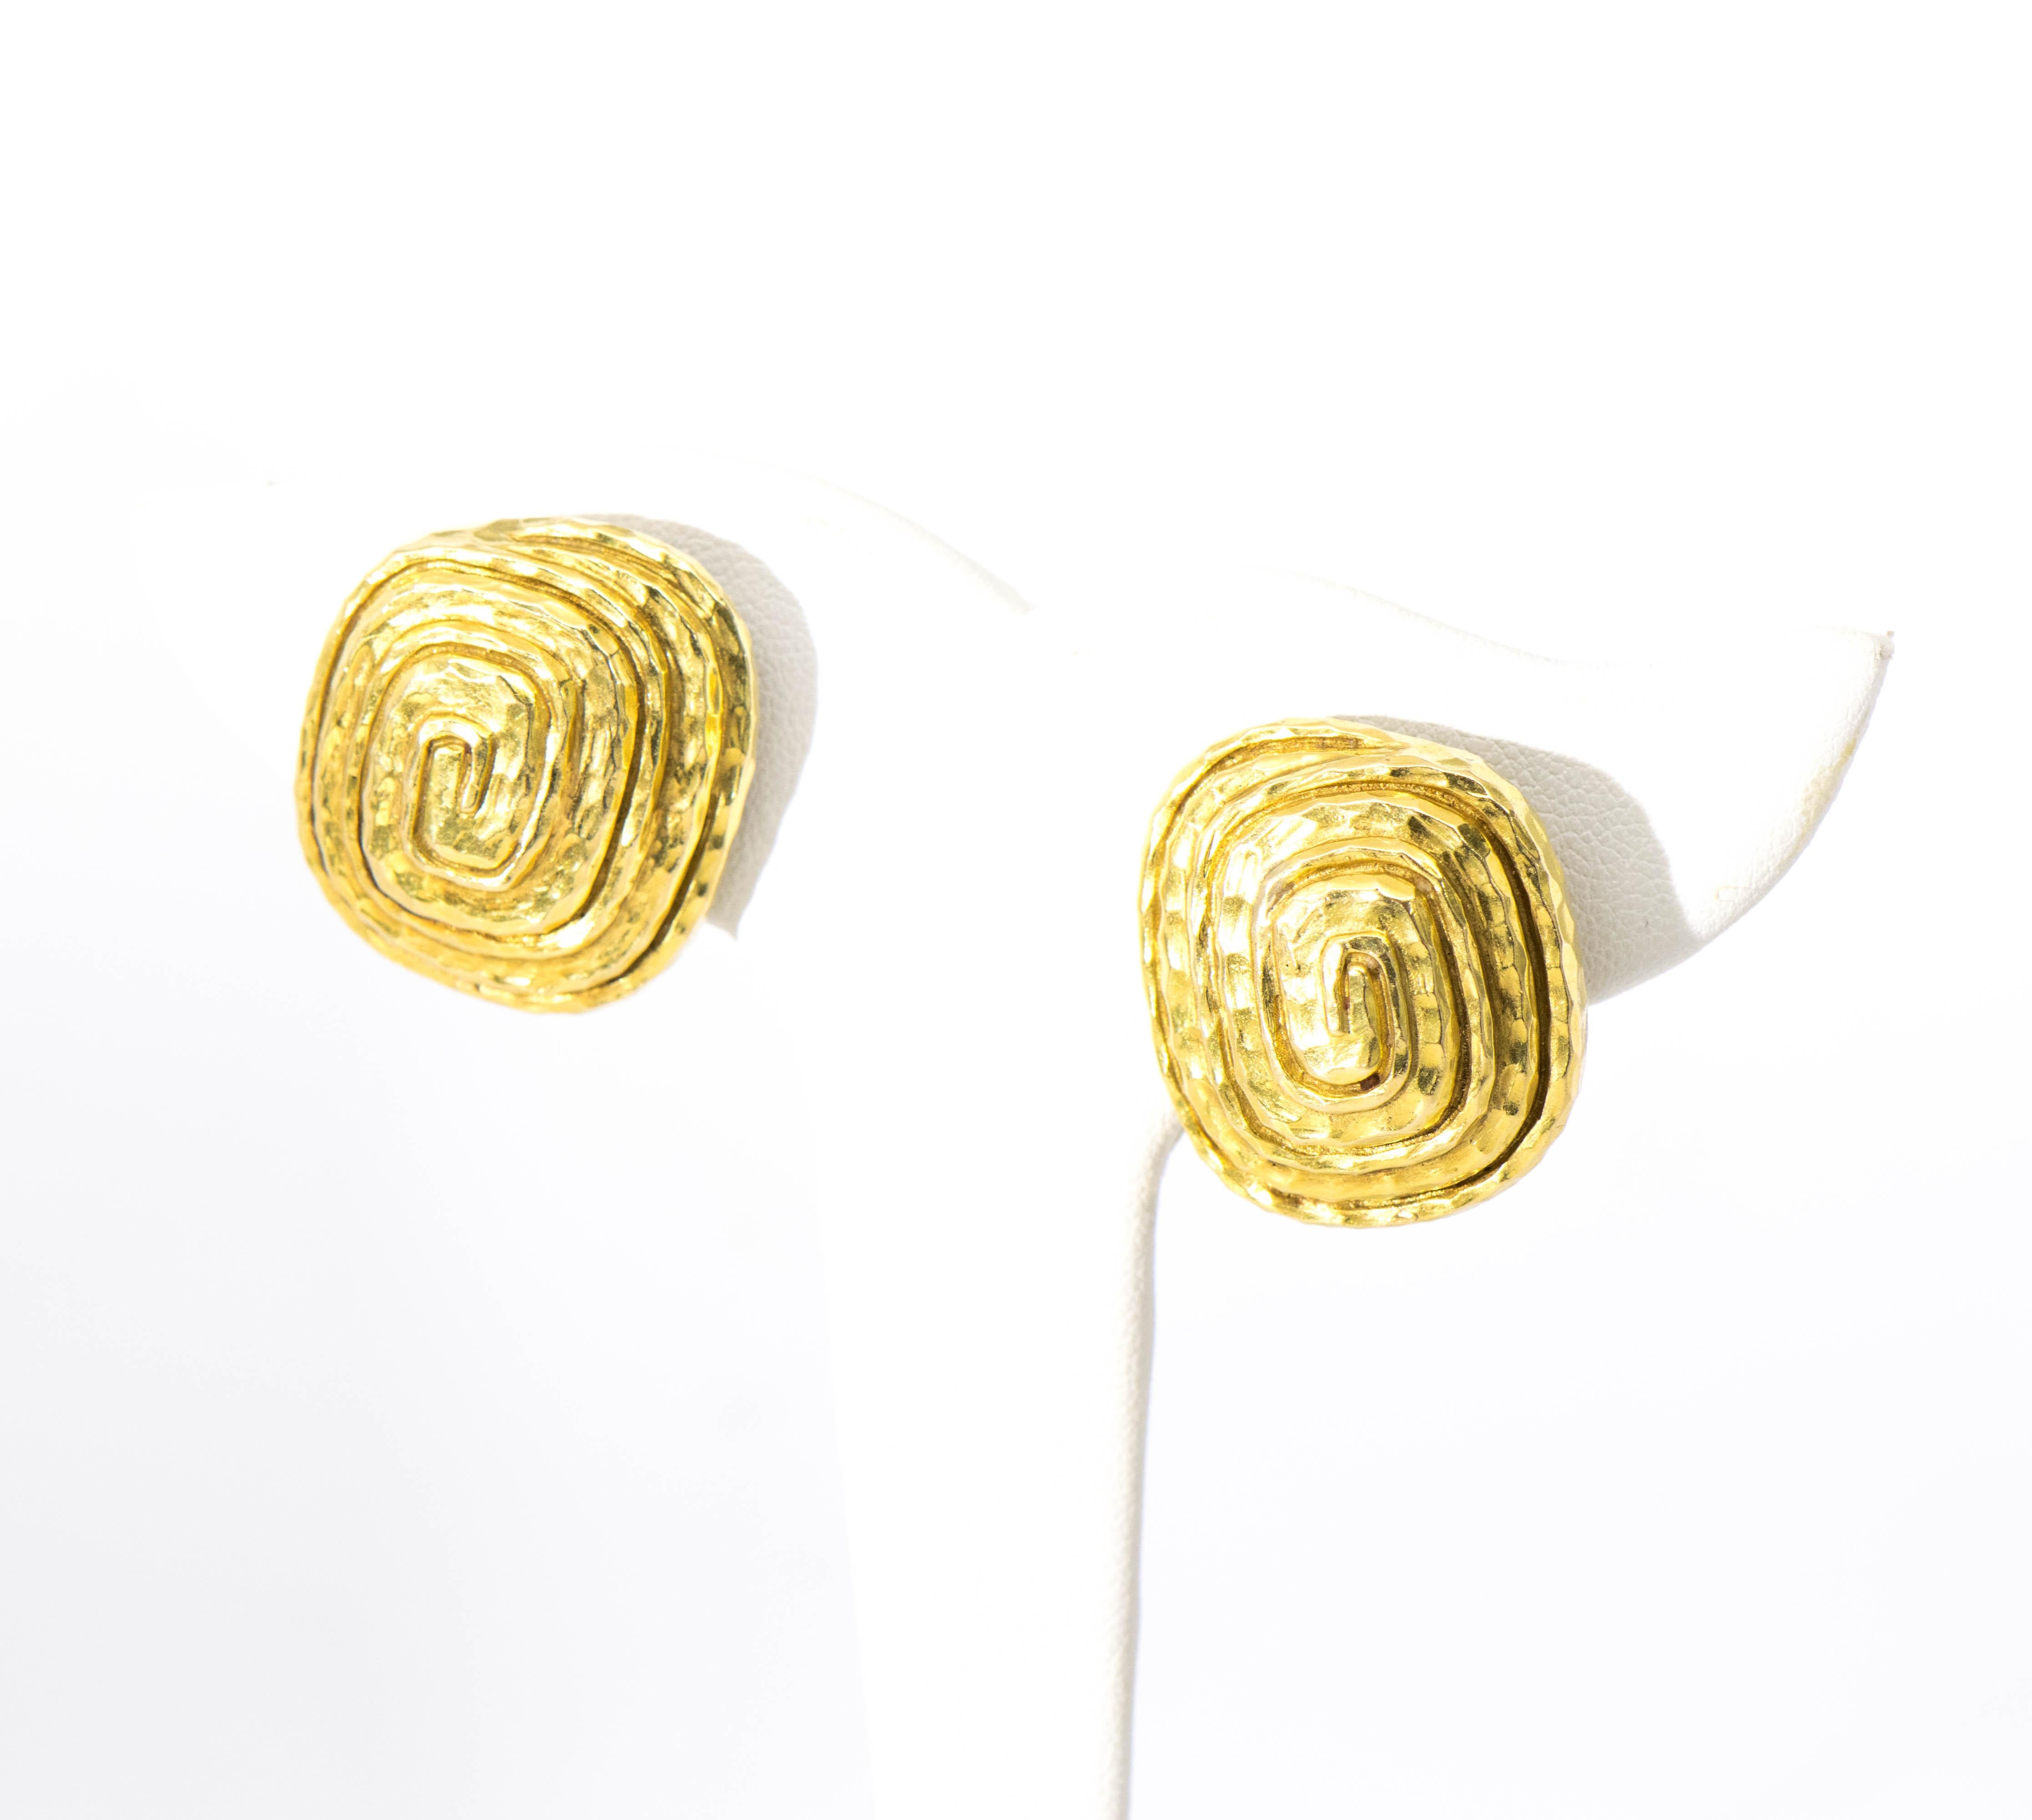 From the iconic Jewelry Designer David Webb, are these stunning Earrings. Fabricated in 18 Karat Yellow Gold in a hammered swirl along a rectangular shape with a clip back. The earrings are 1 1/4 inches in length and 1 inch in width with an